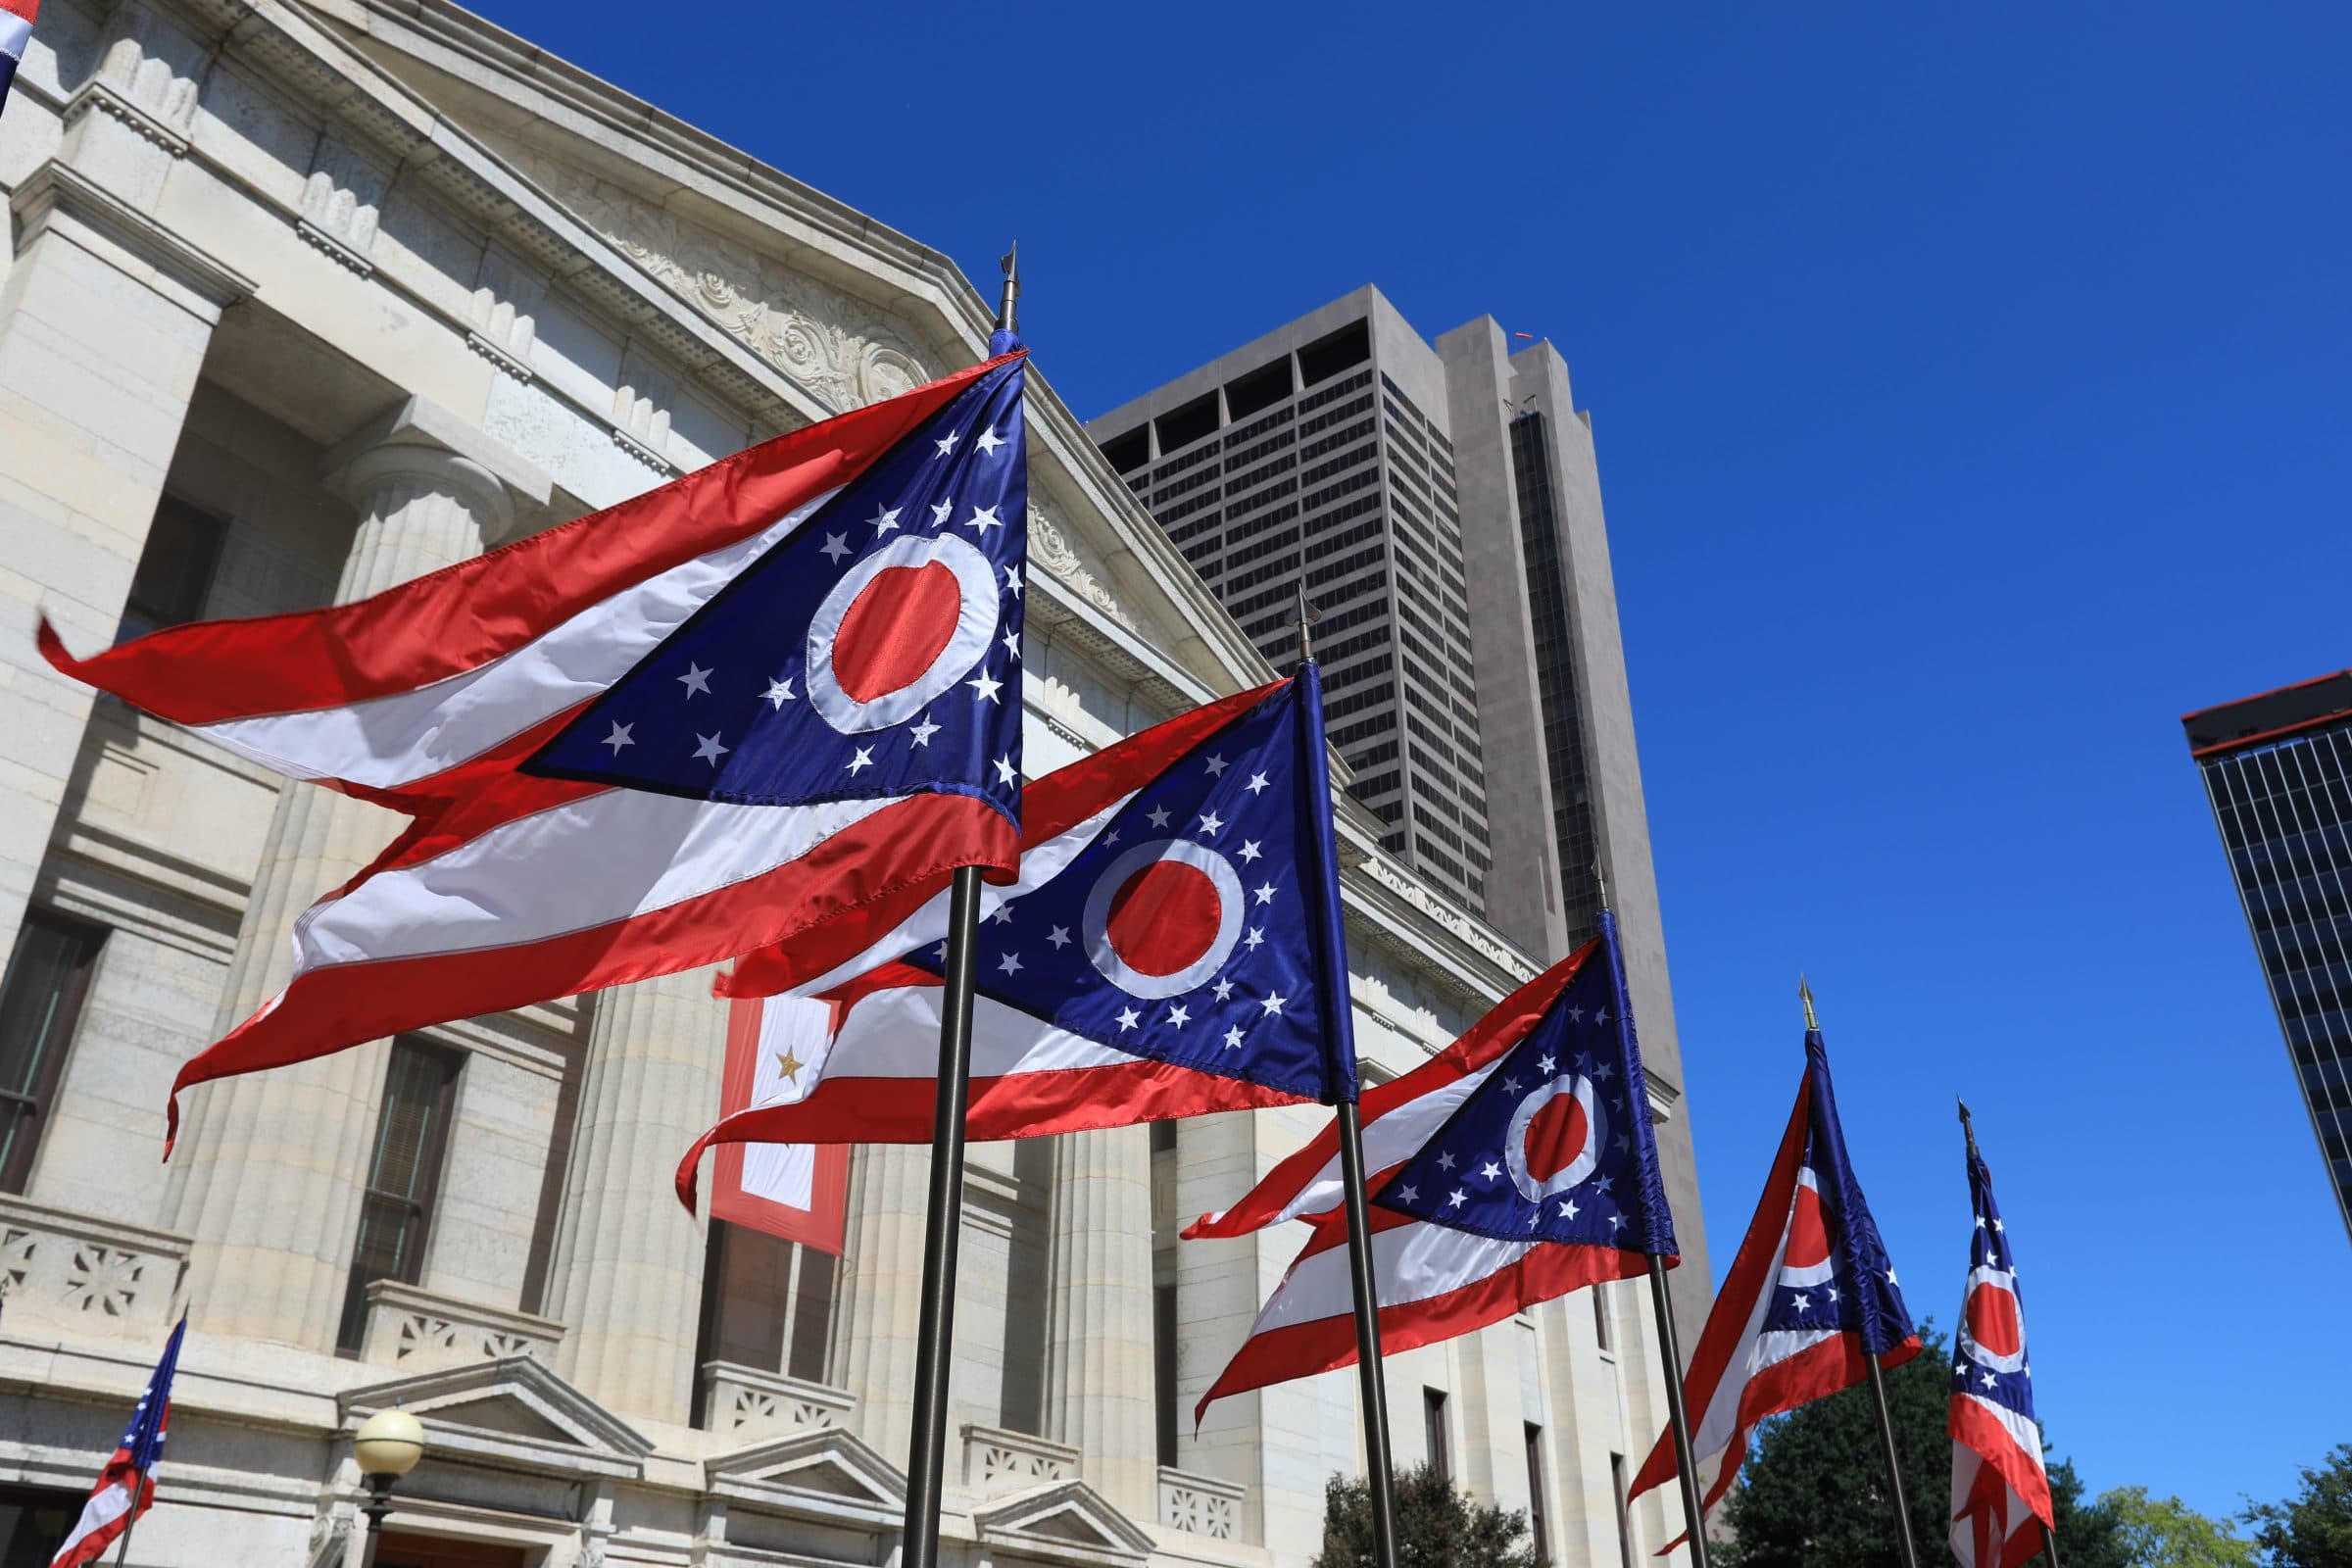 State of Ohio flags waving in front of the Statehouse in Columbus, OG.